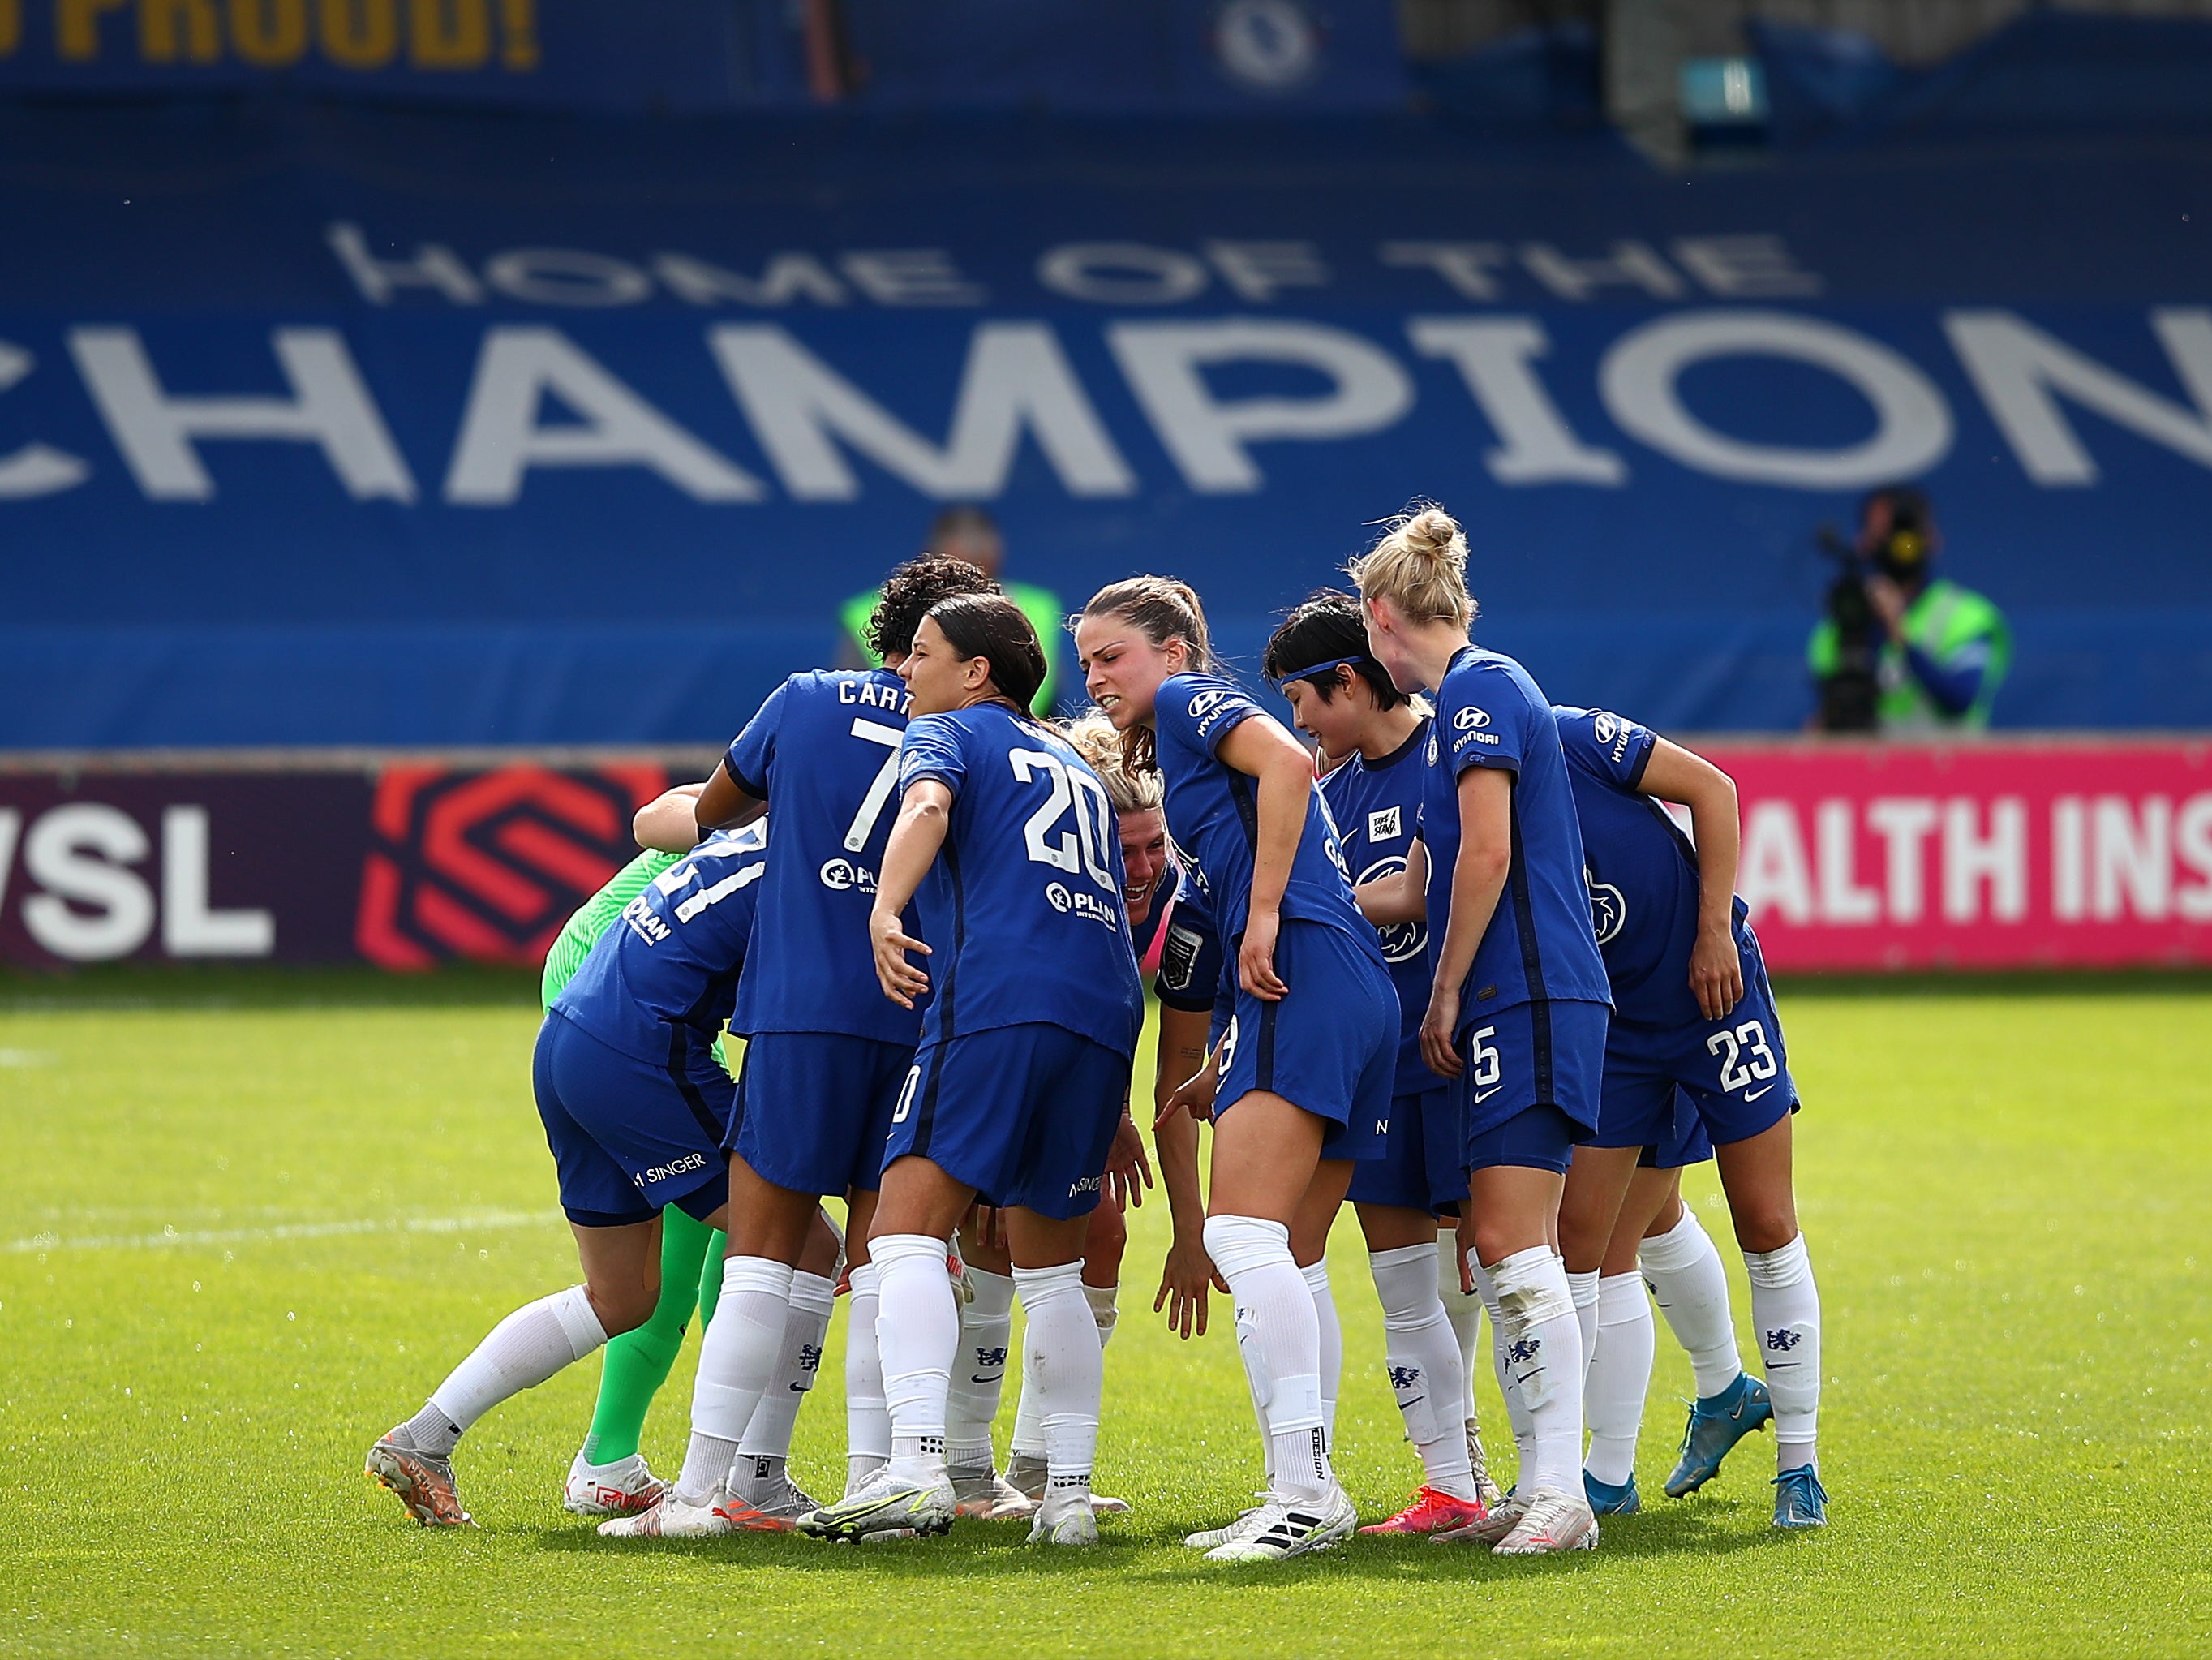 Chelsea players huddle before a game